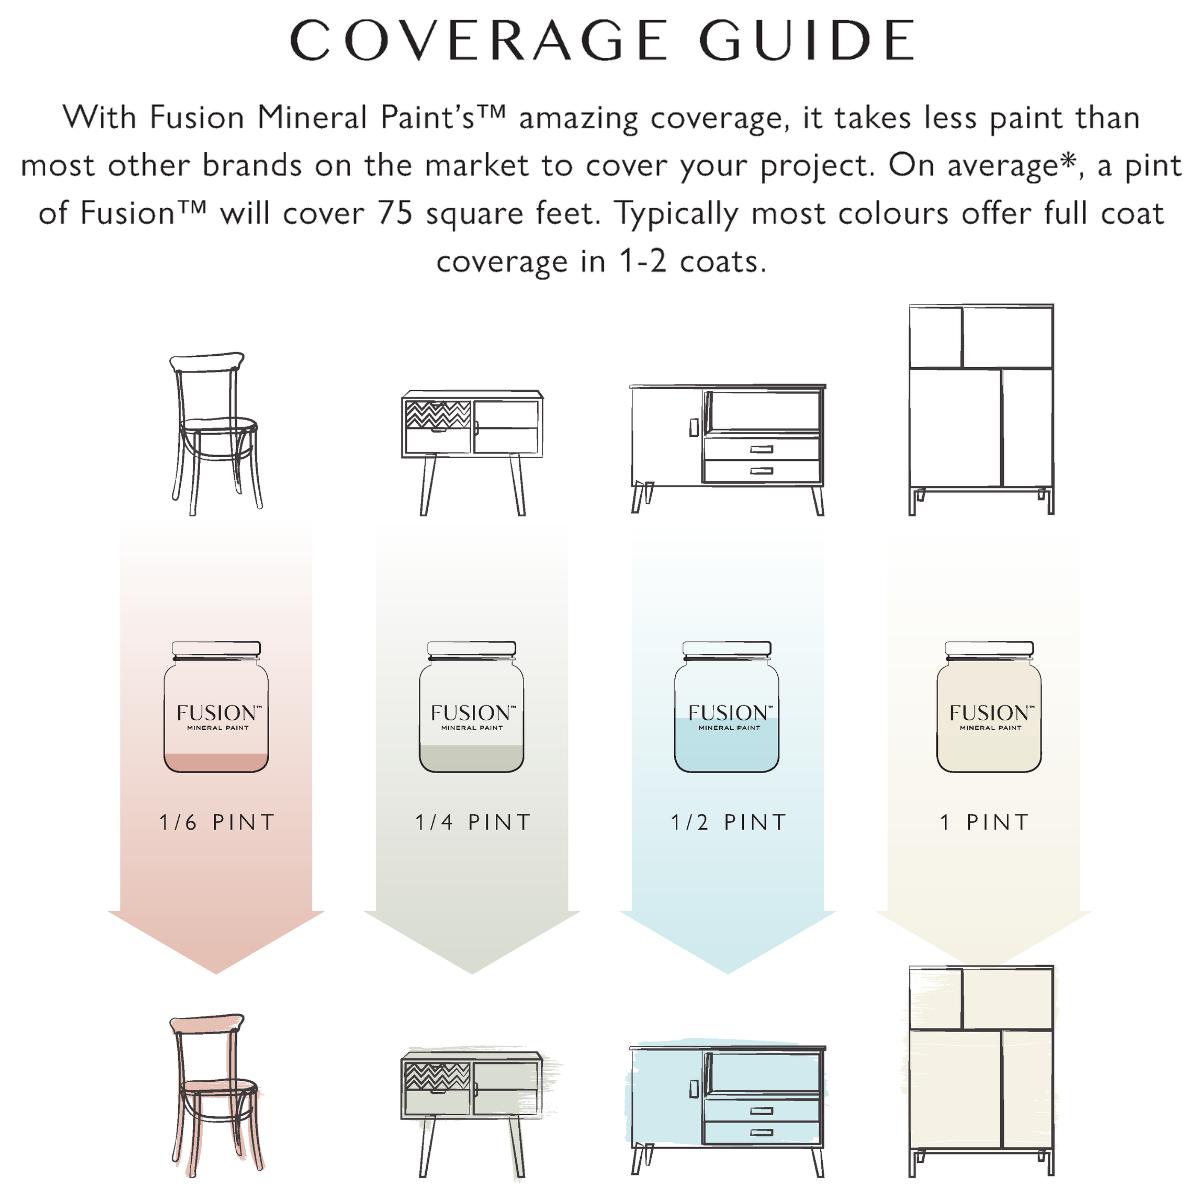 Fusion Mineral Paint Coverage Guide Card - FREE Digital Download @ Painted Heirloom